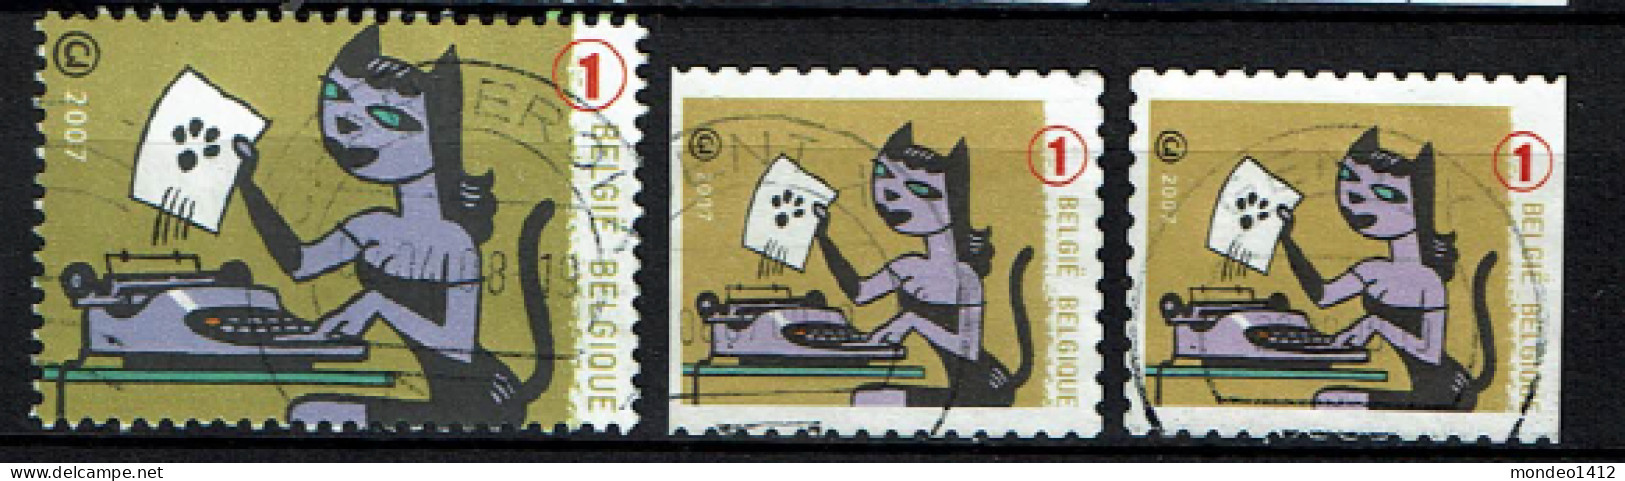 België OBP 3713,3717 - Schrijfmachines, Les Machines à écrire, Typewriters - Olivetti - Used Stamps